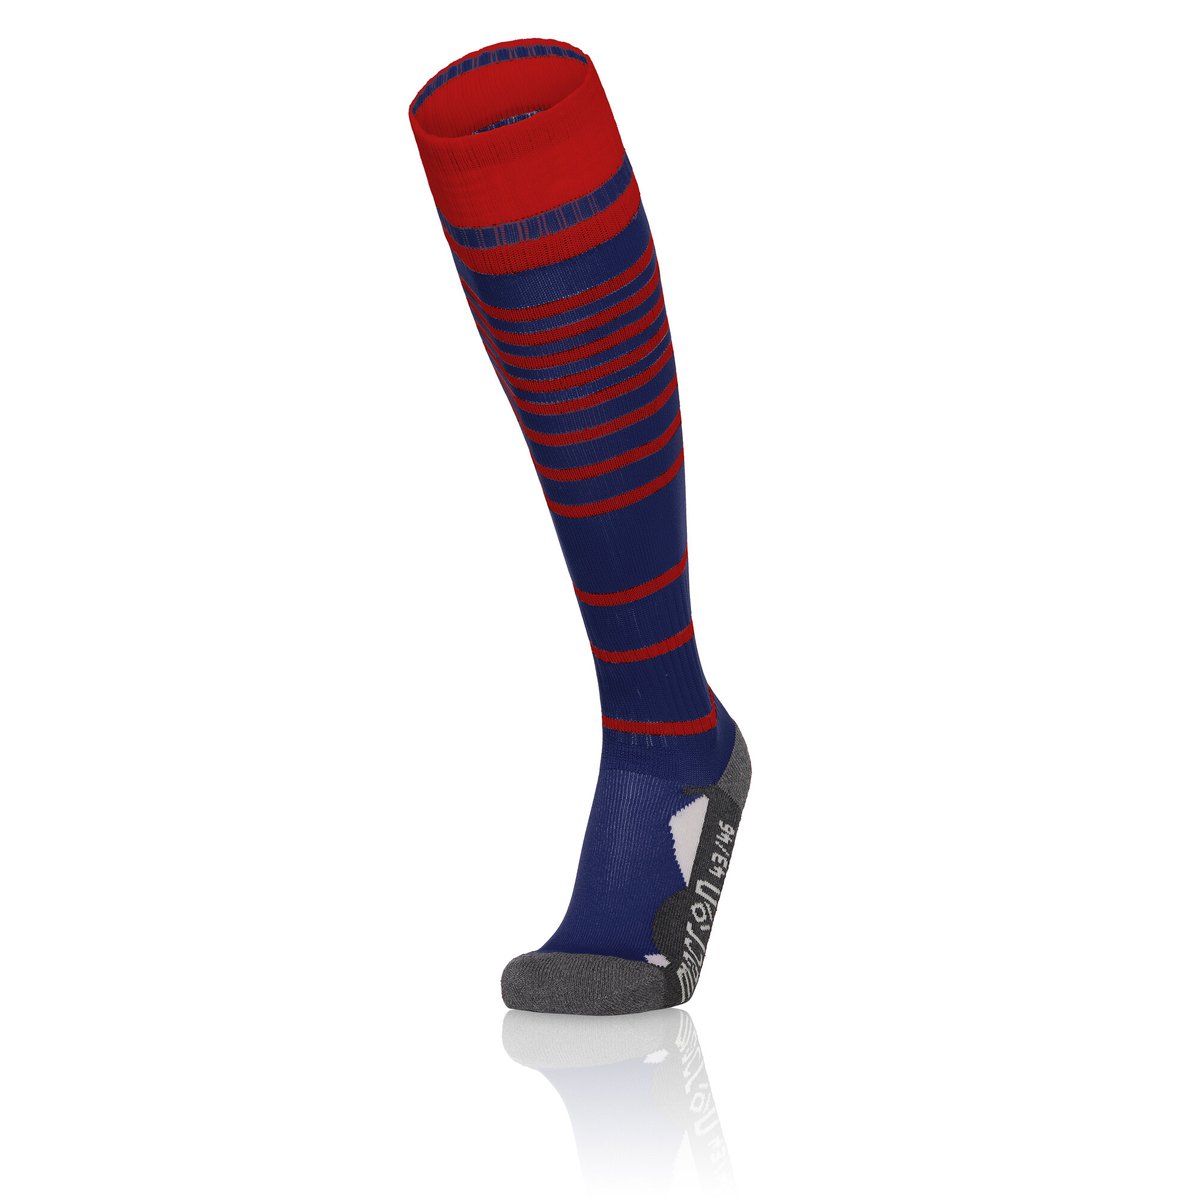 Macron Target Match Sock - Navy/Red (Pack of 5)